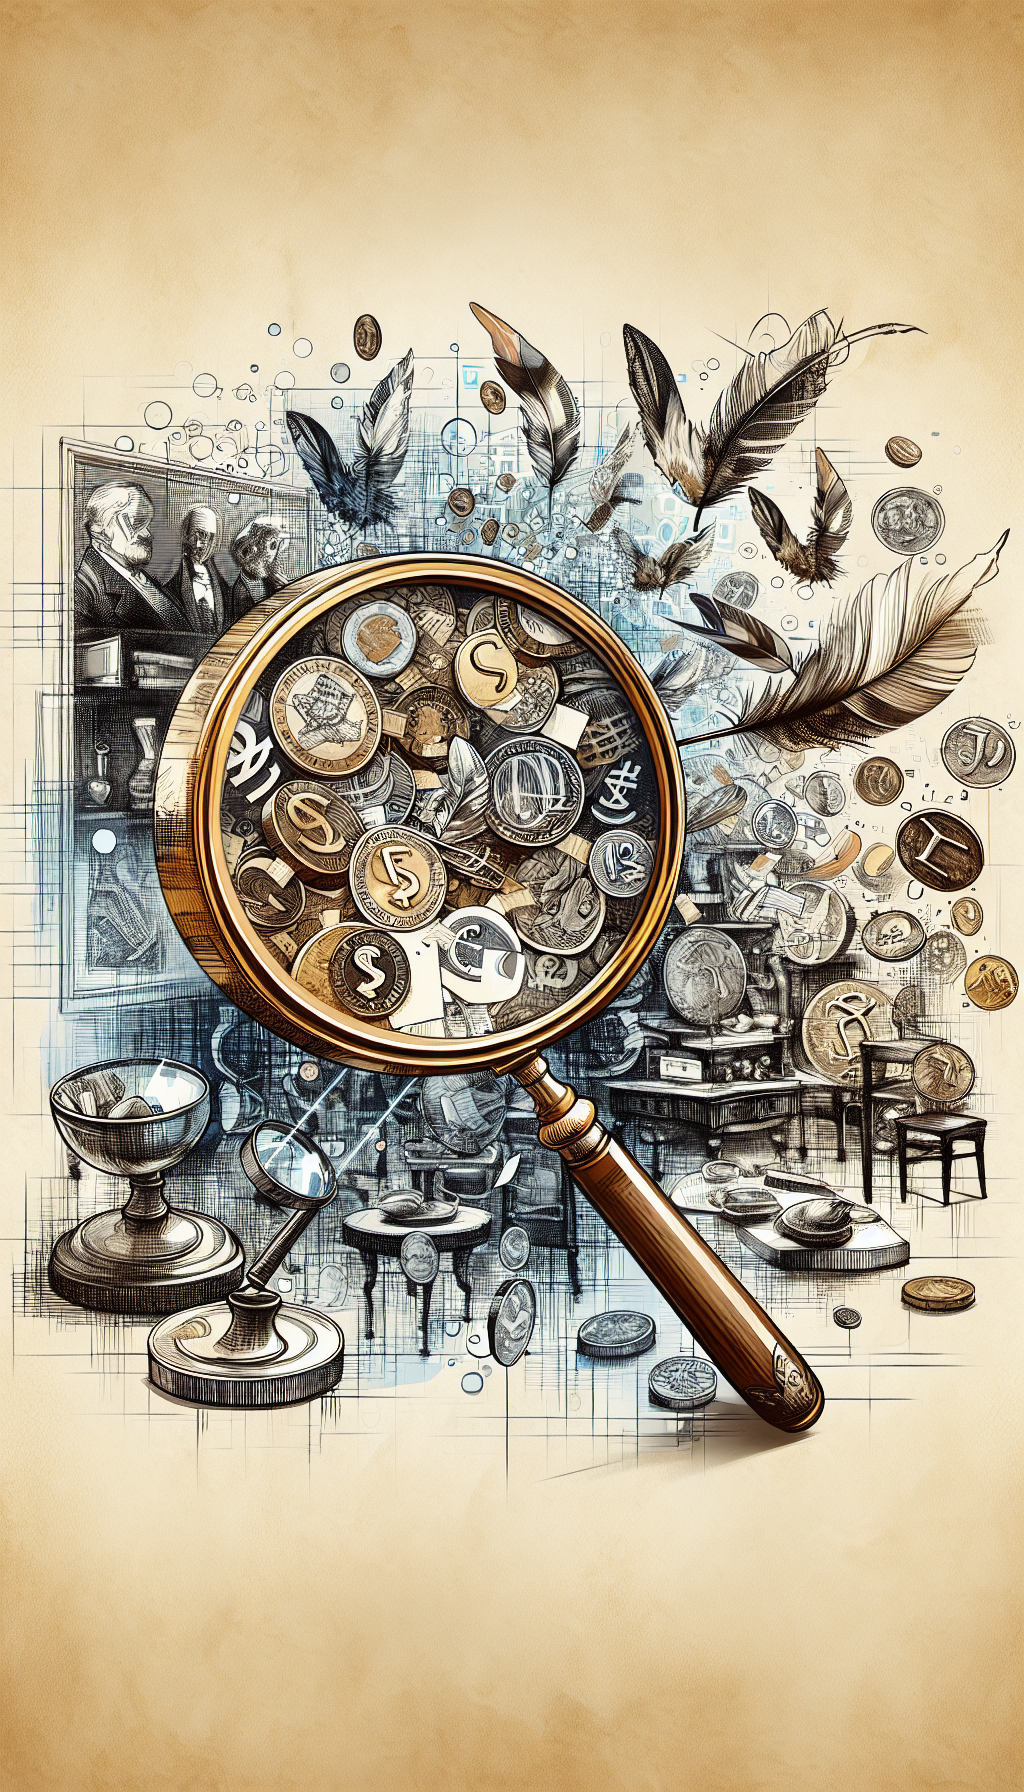 An illustration of an old-fashioned magnifying glass revealing the hidden price tags of various antiques arrayed beneath. Around the magnifying glass, iconic symbols of currency morph into feathers, symbolizing the lightness of free appraisals. The image oscillates between finely detailed ink lines for the antiques and a loose watercolor style for the transformative currency, enhancing the blend of precision and ease.